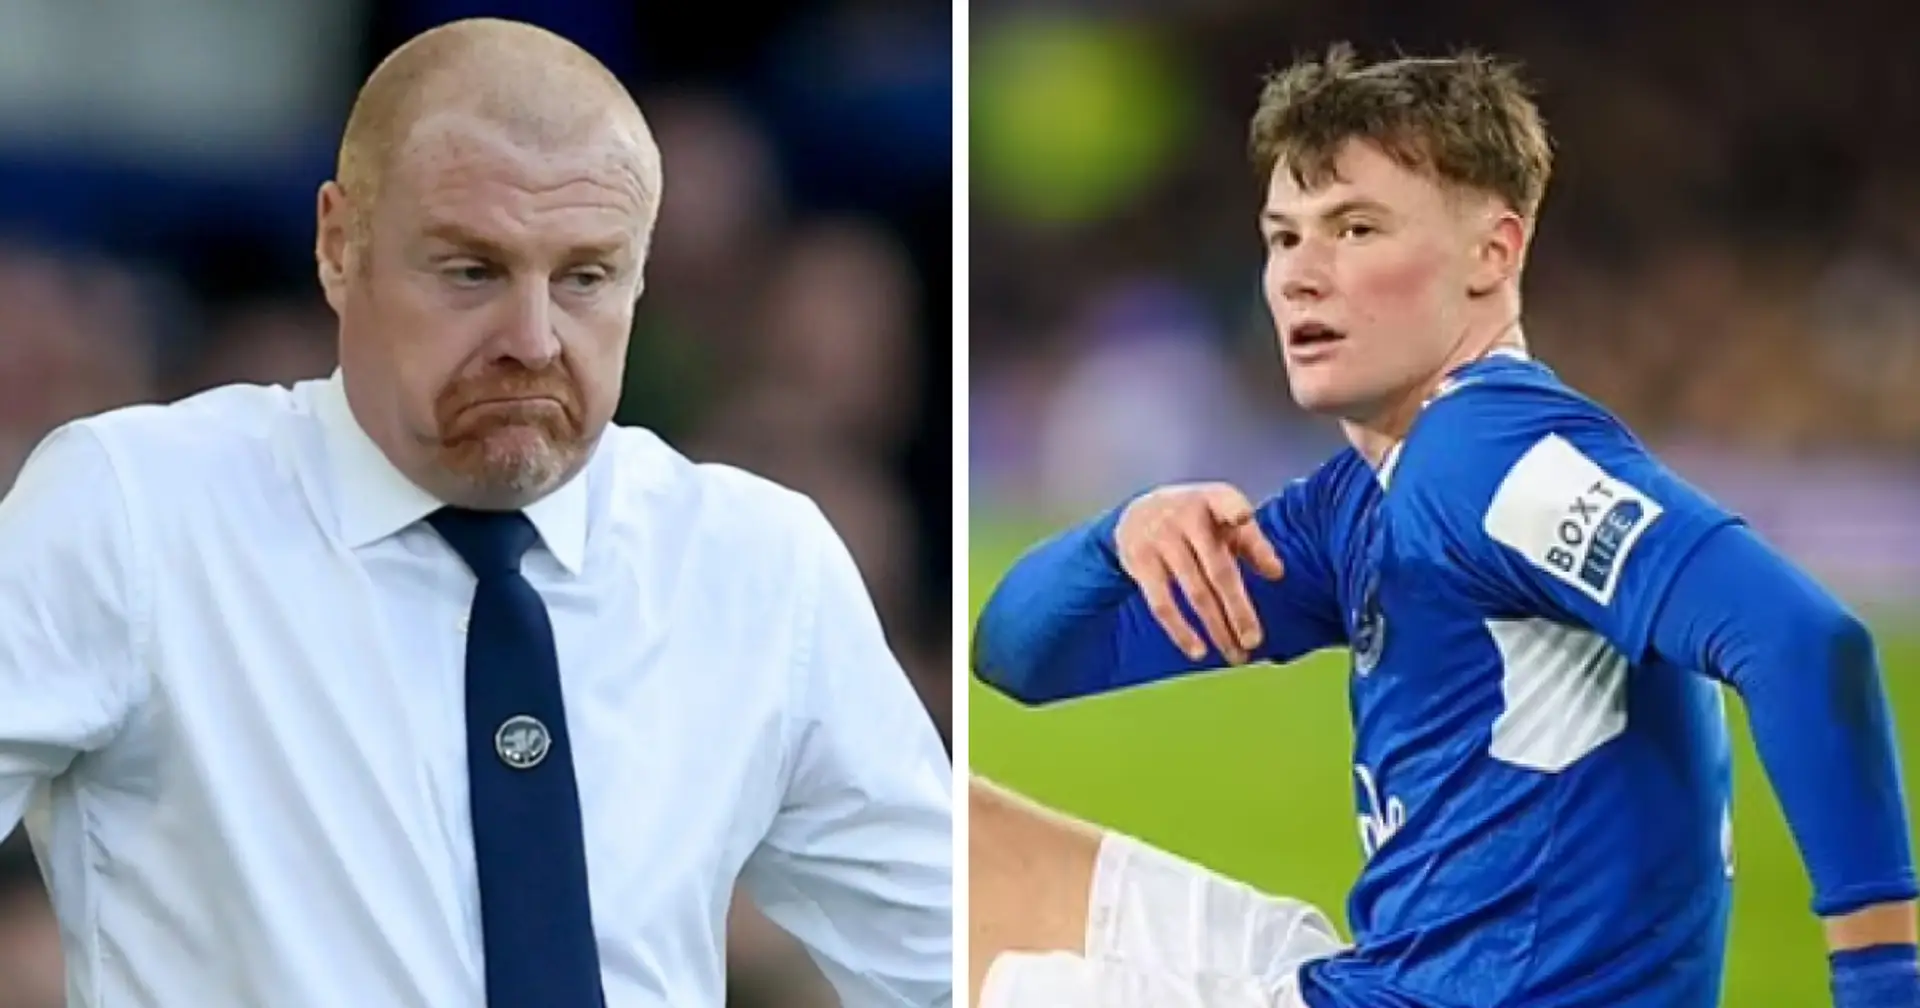 'It's really that simple': Sean Dyche breaks silence on 'altercation' with Everton star